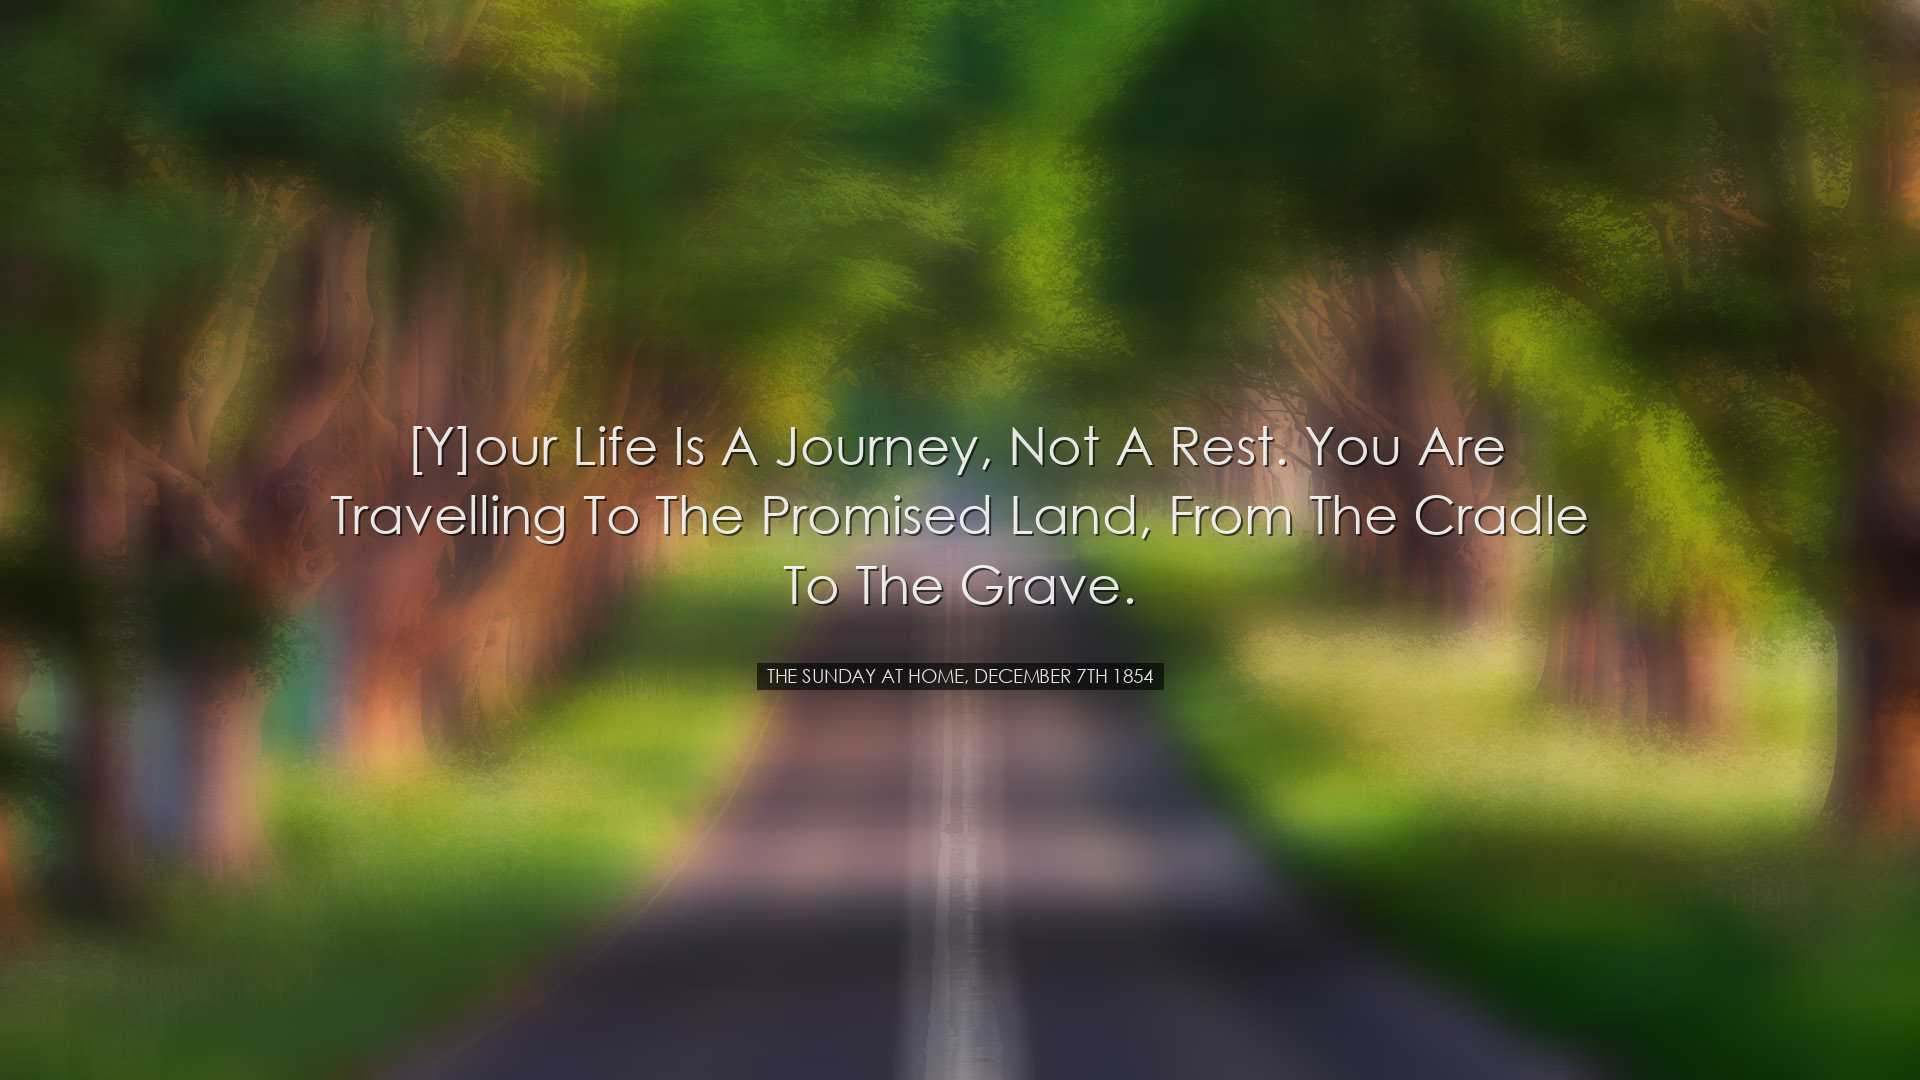 [Y]our life is a journey, not a rest. You are travelling to the pr